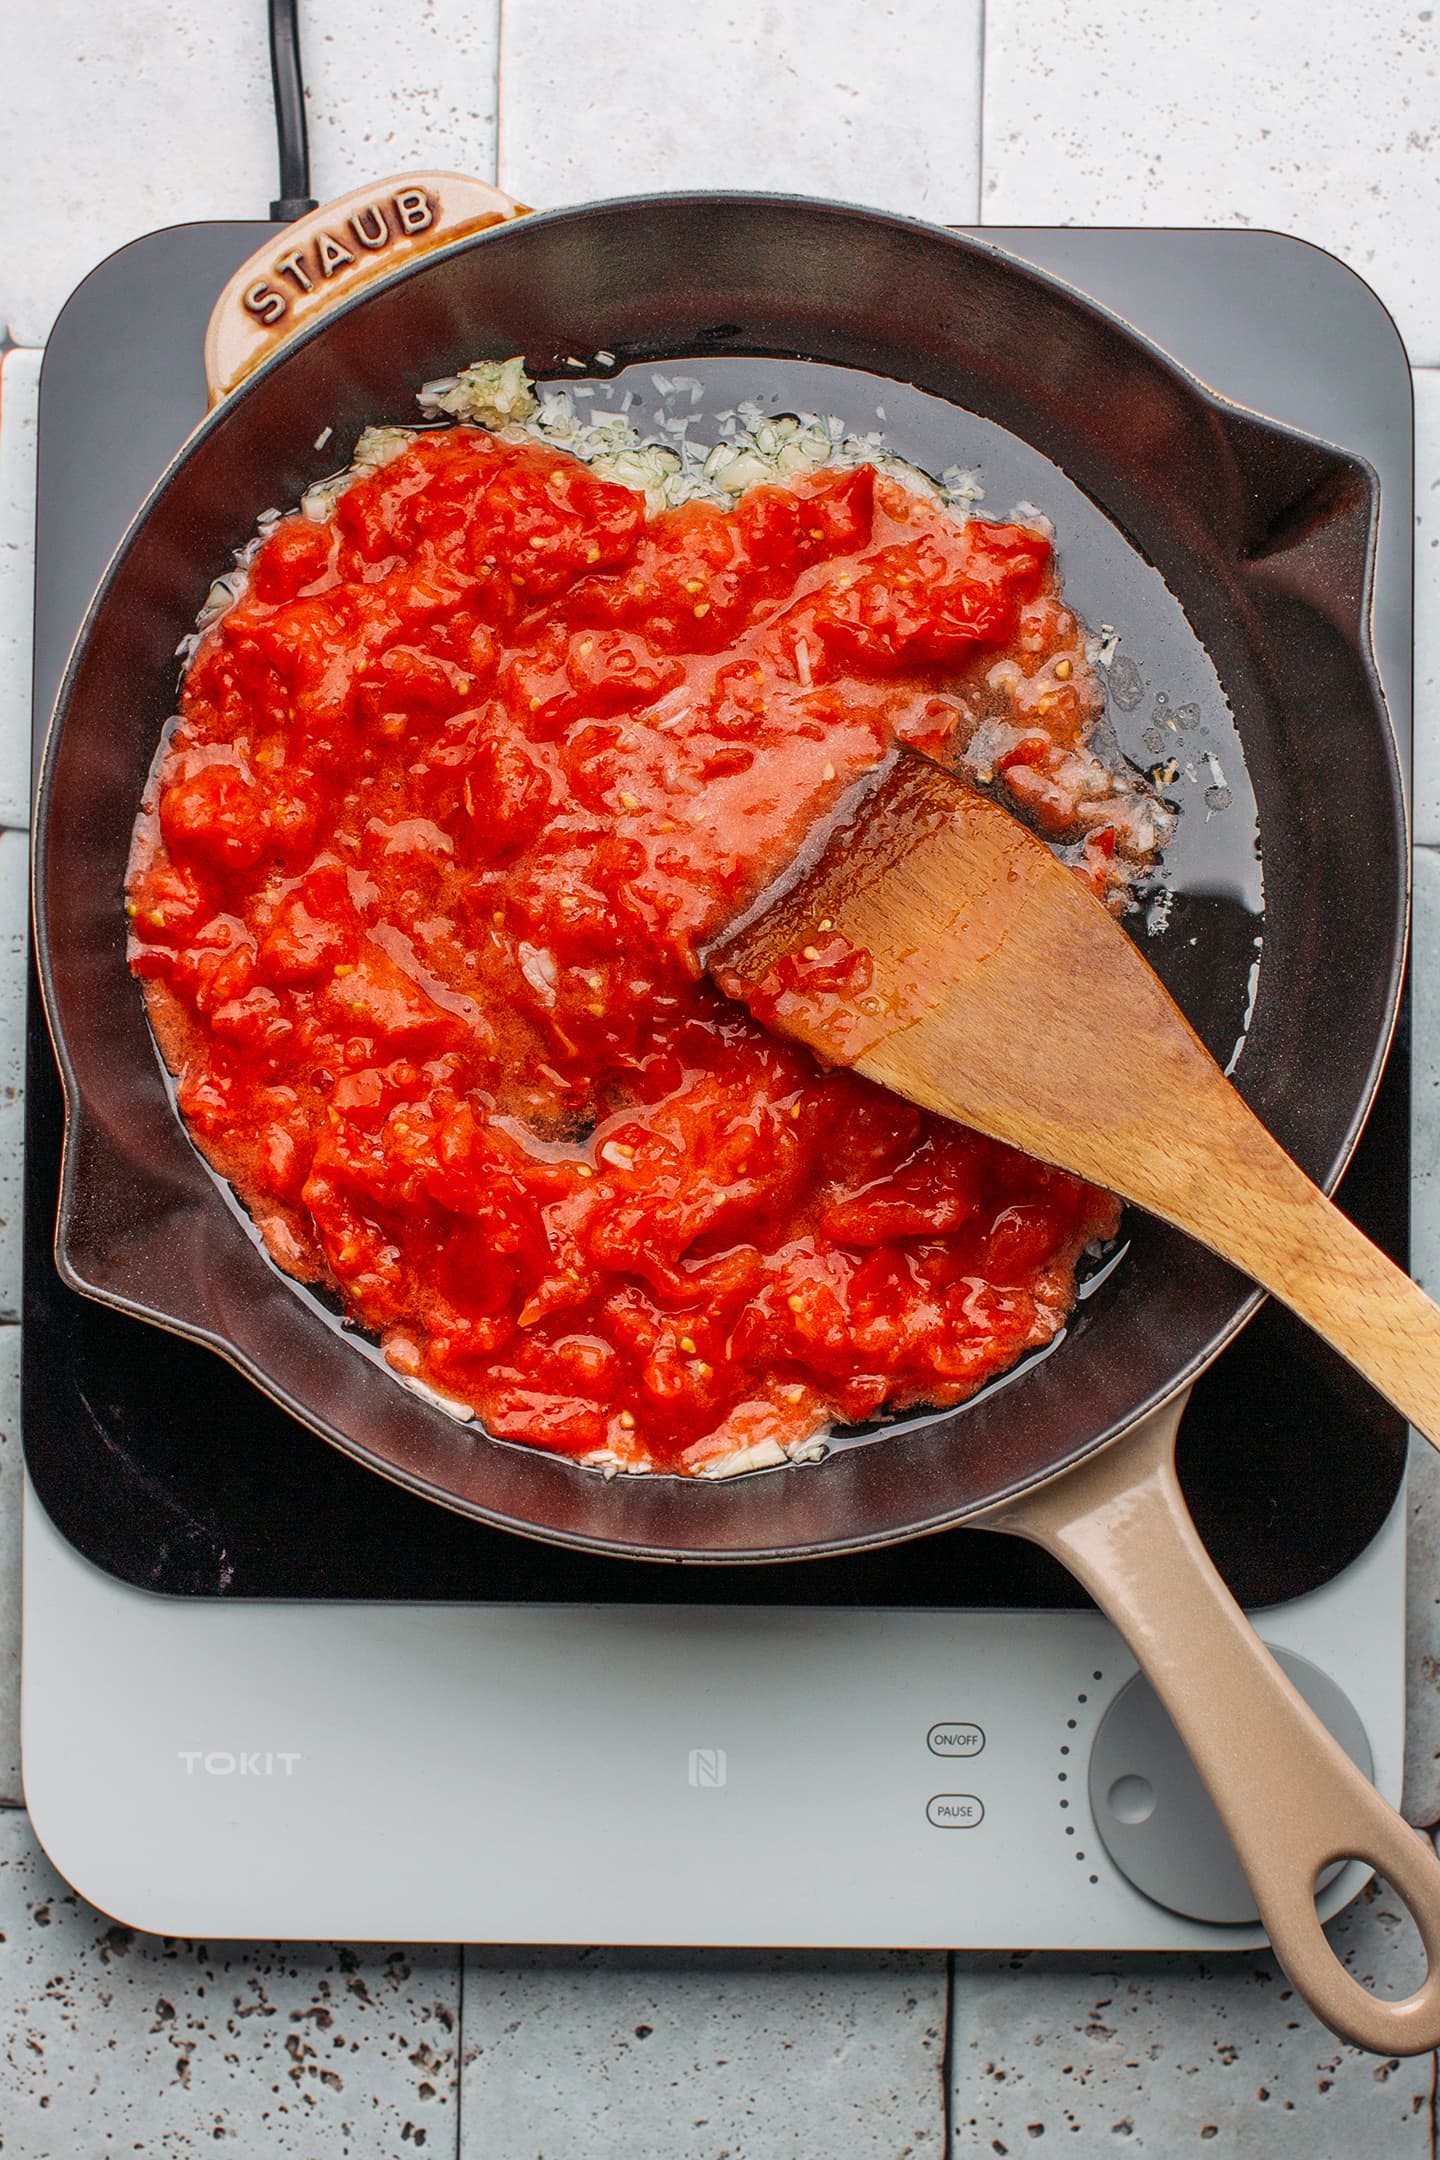 Crushed tomatoes and garlic in a skillet.